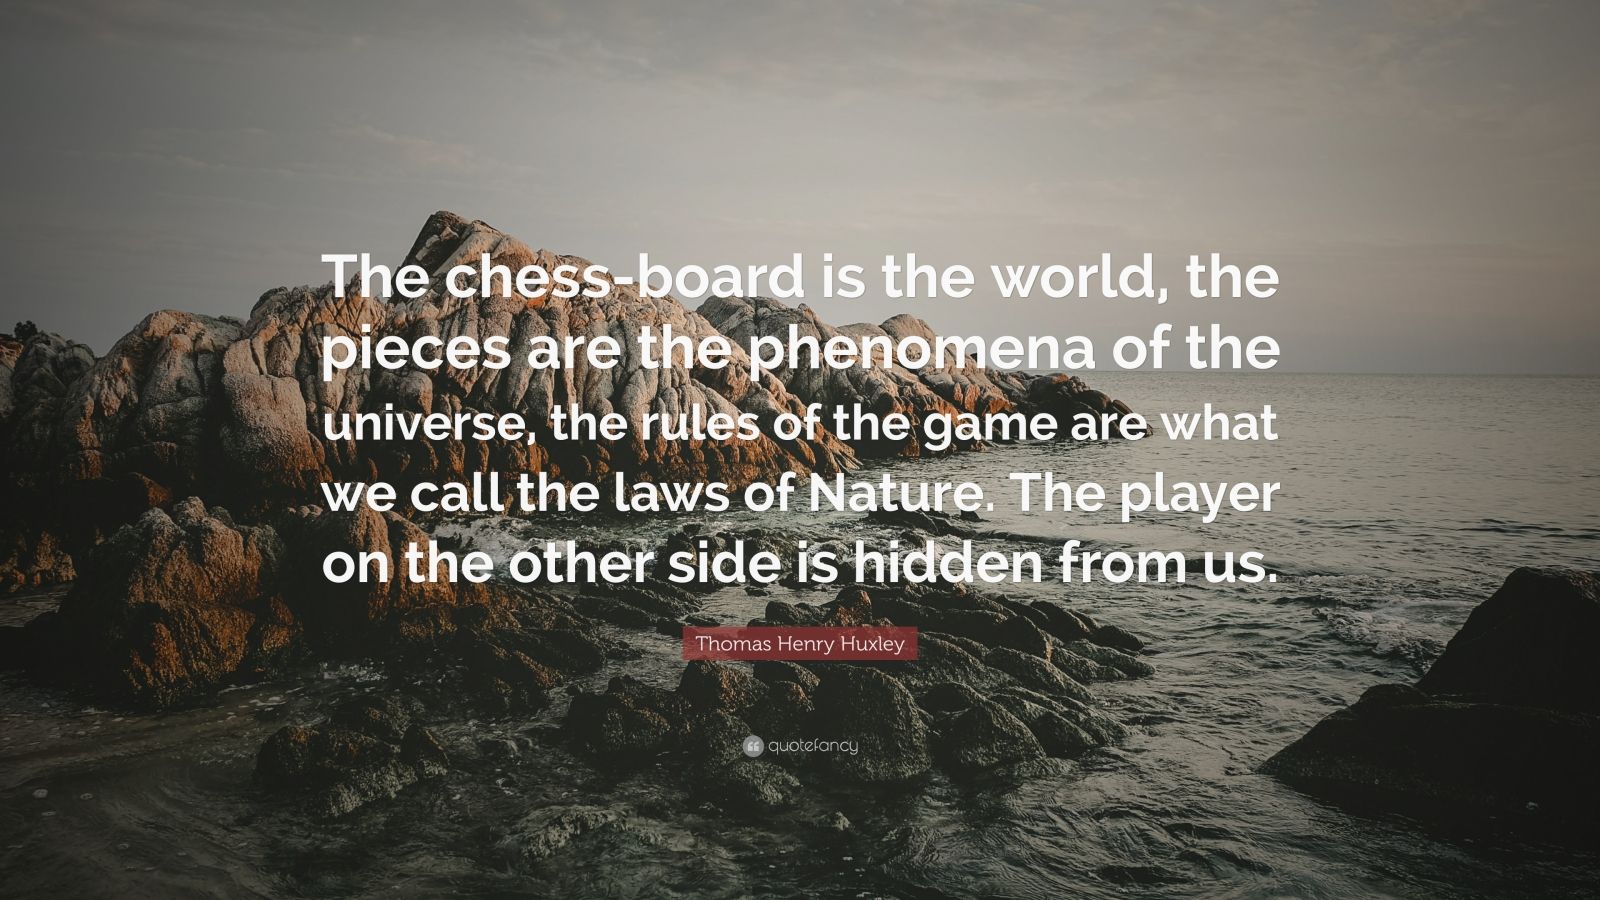 3866697-Thomas-Henry-Huxley-Quote-The-chess-board-is-the-world-the-pieces.jpg